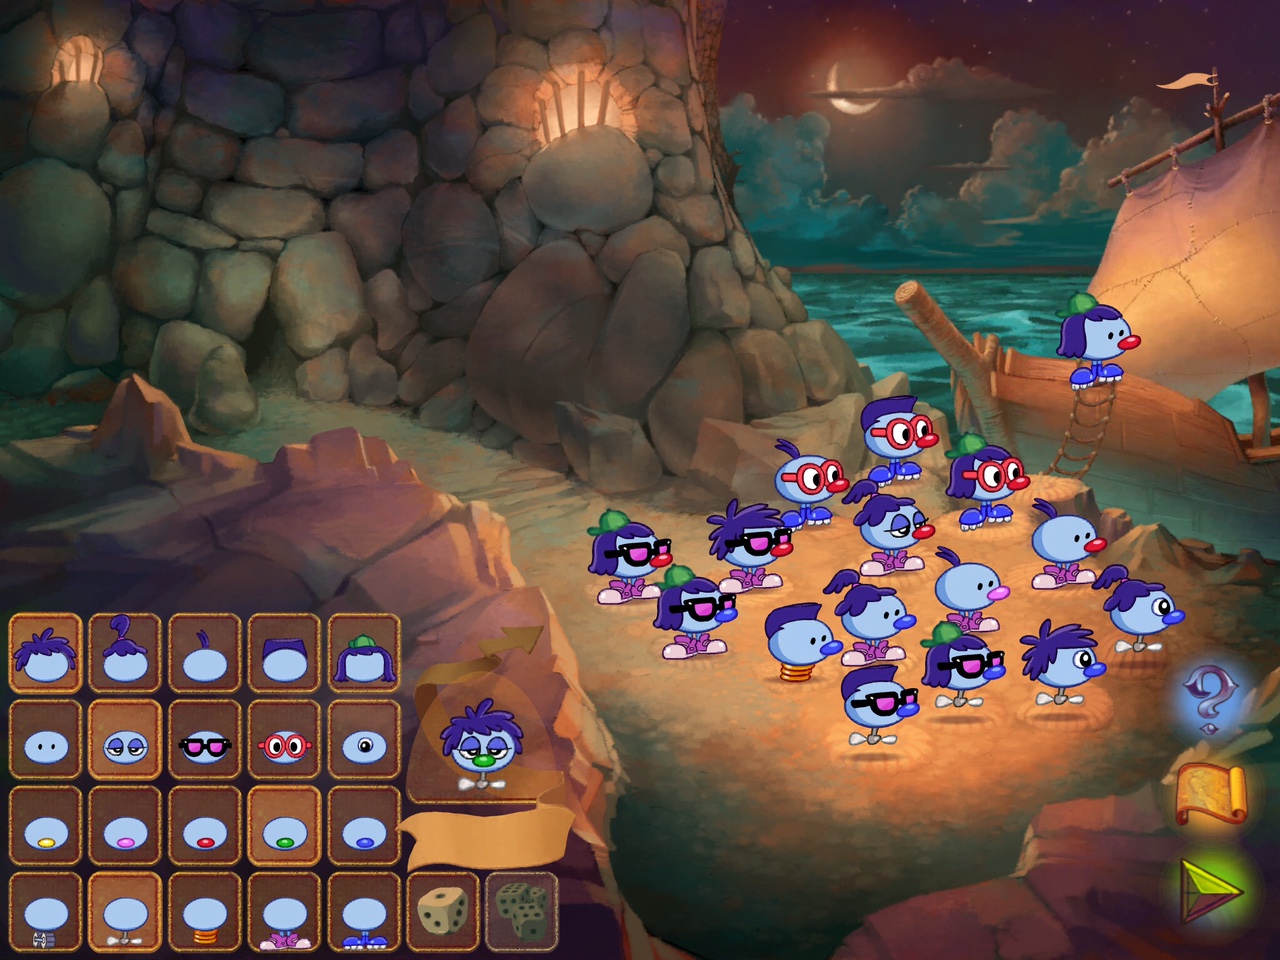 zoombinis game got deleted